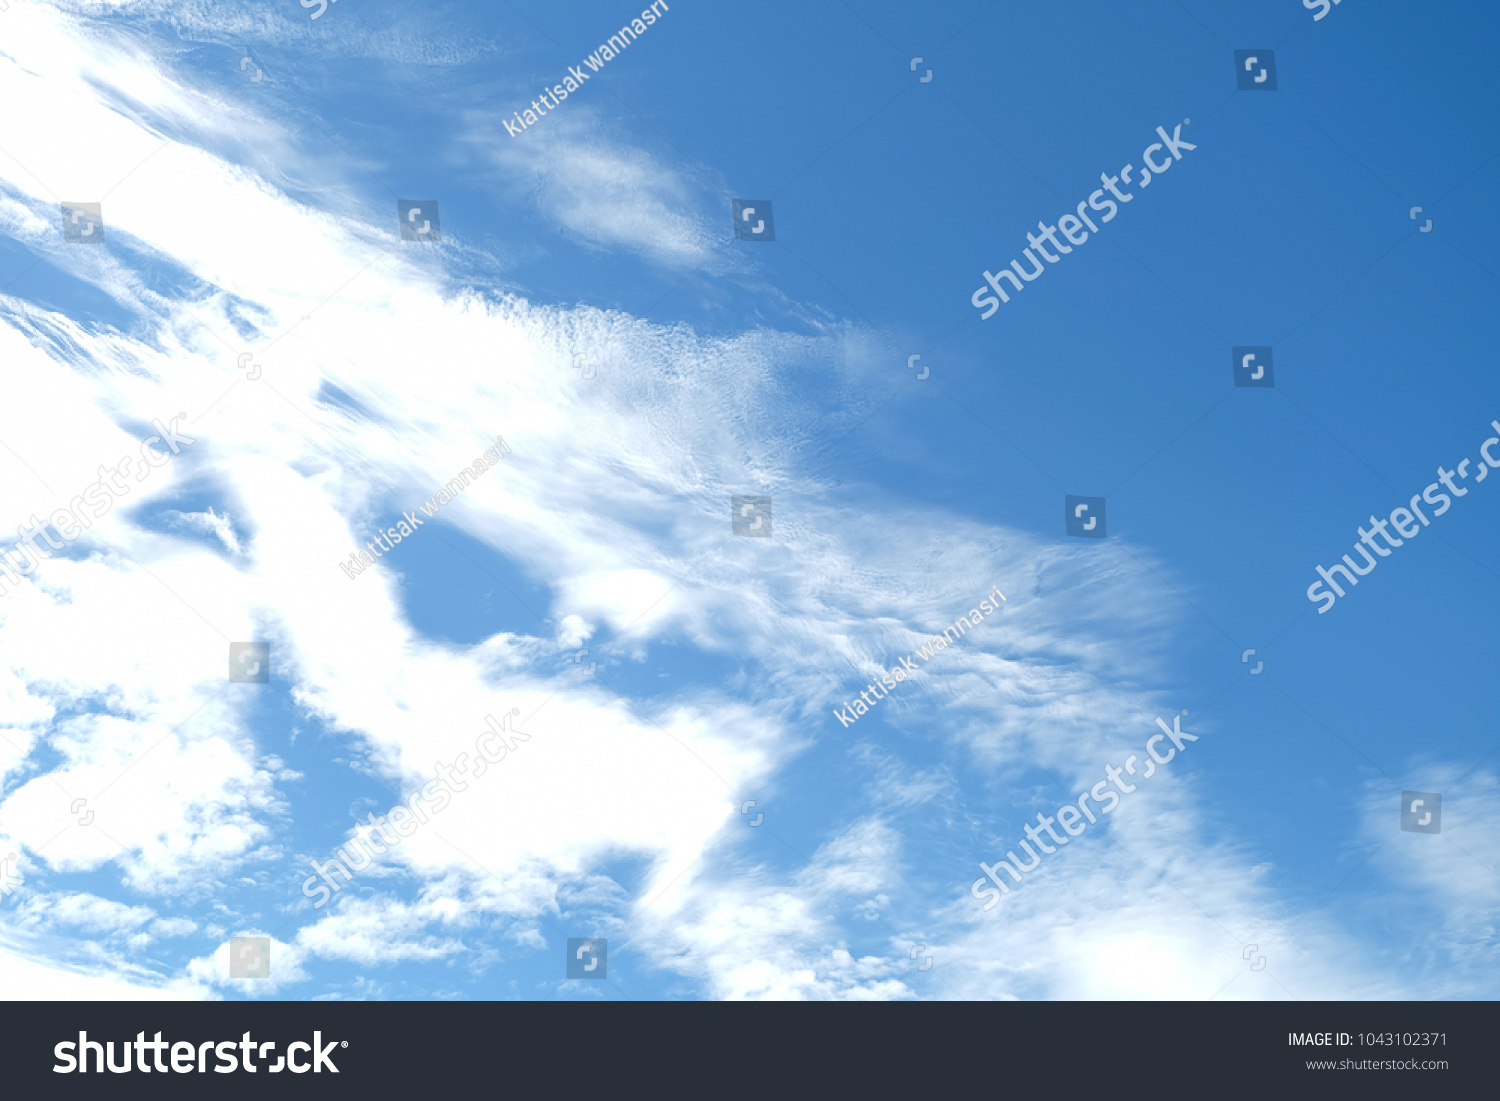 Blue sky and clouds. background. Sky background / Blue Sky and Clouds #1043102371